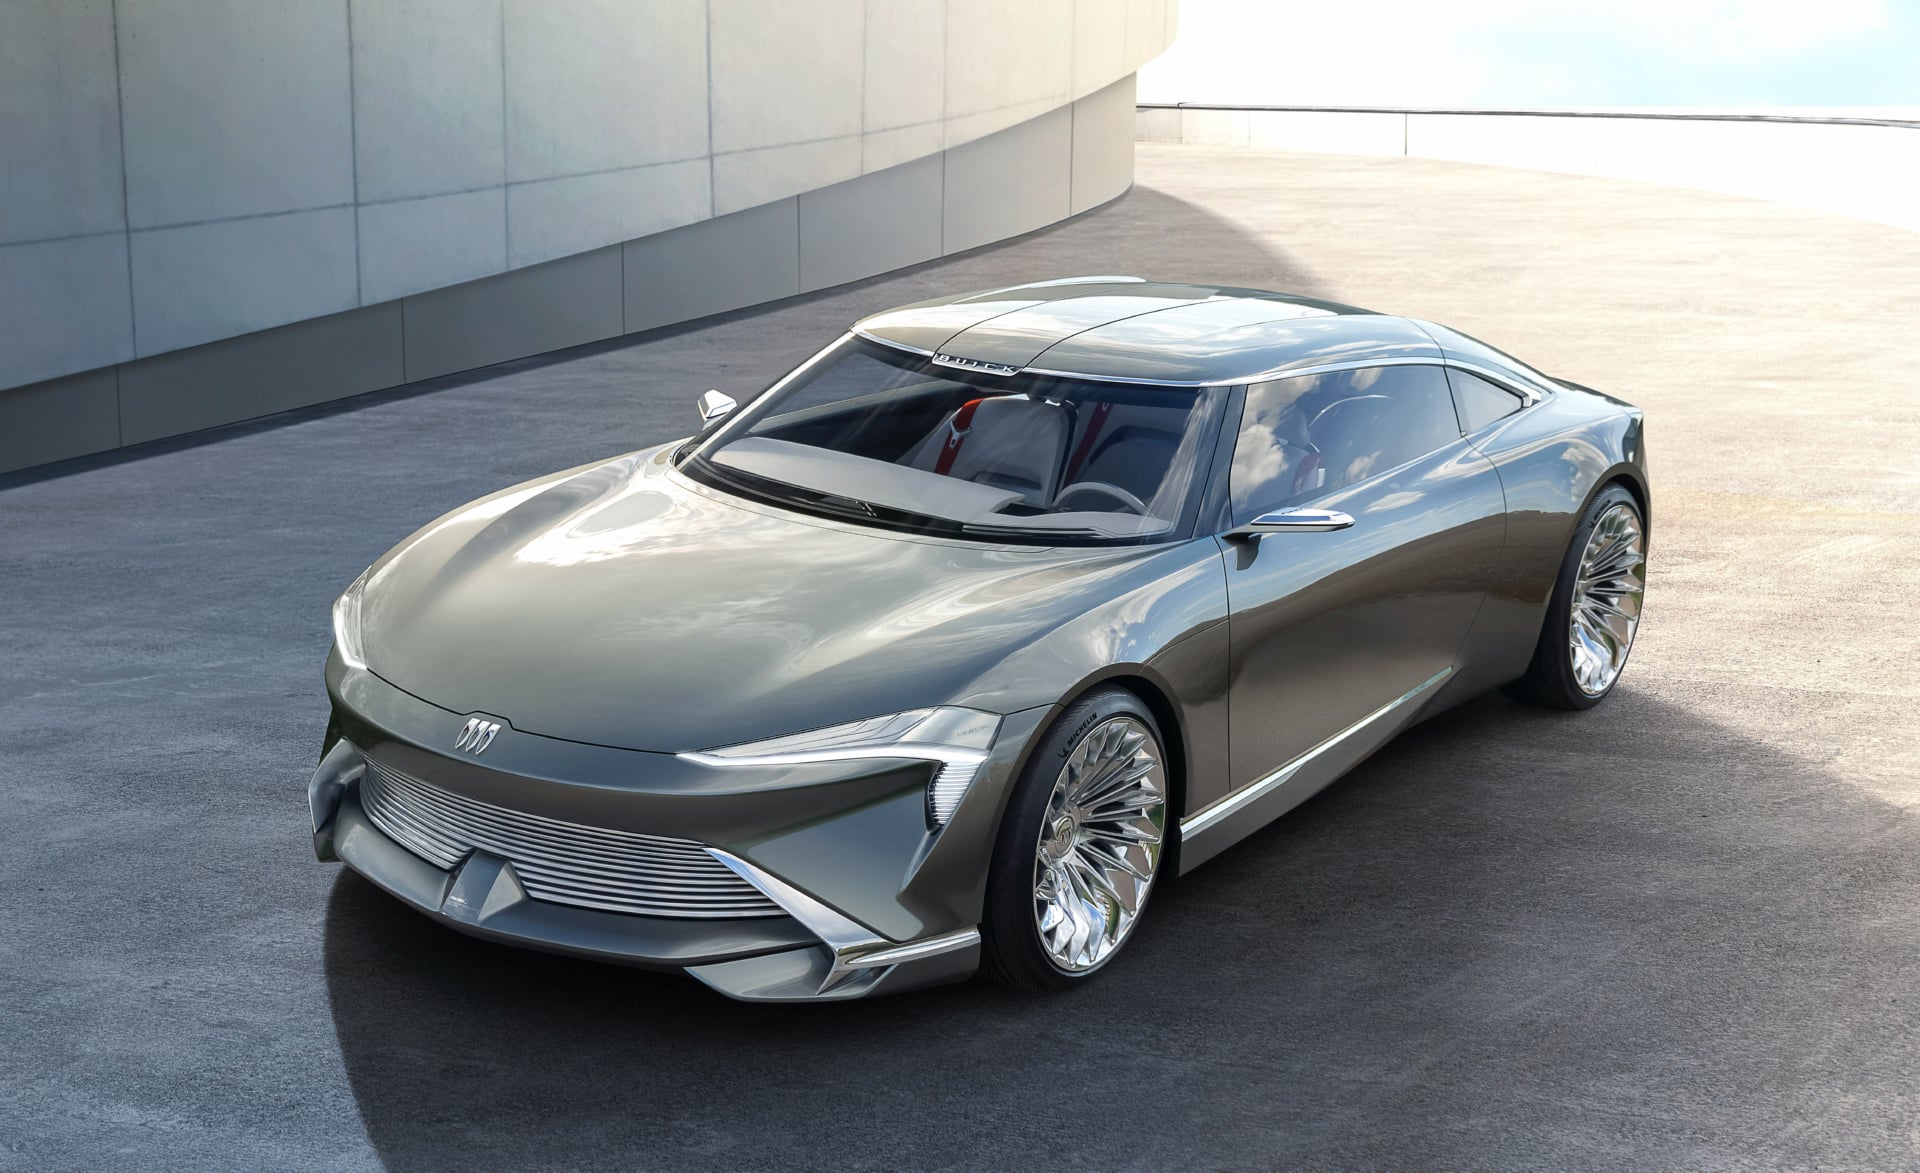 Buick Wildcat EV Concept wallpapers HD quality